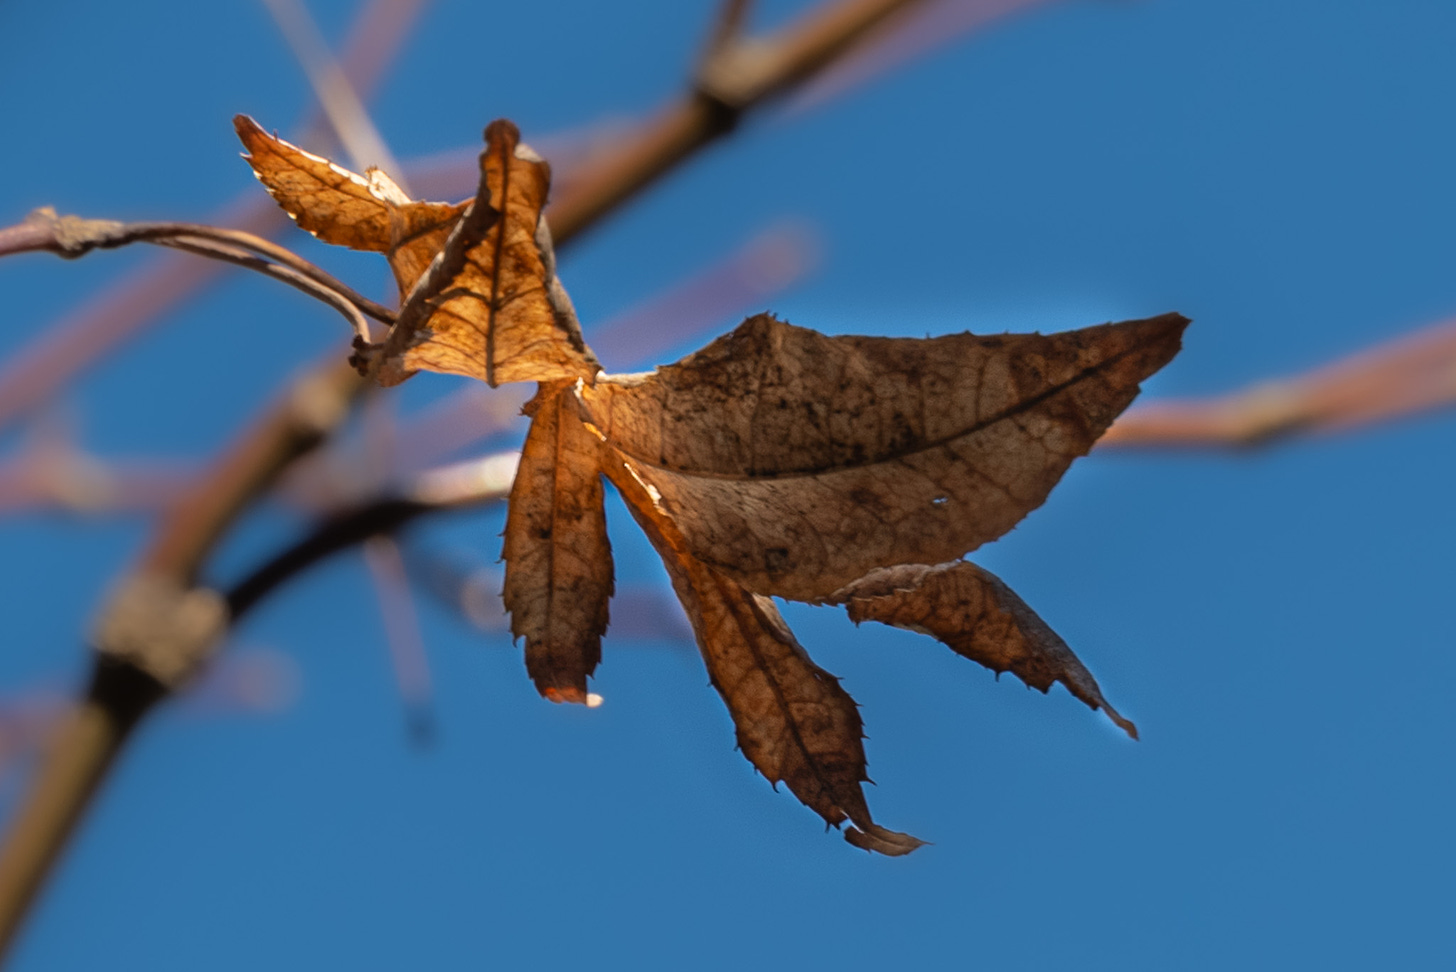 A single brown leaf on a branch against a bright blue sky